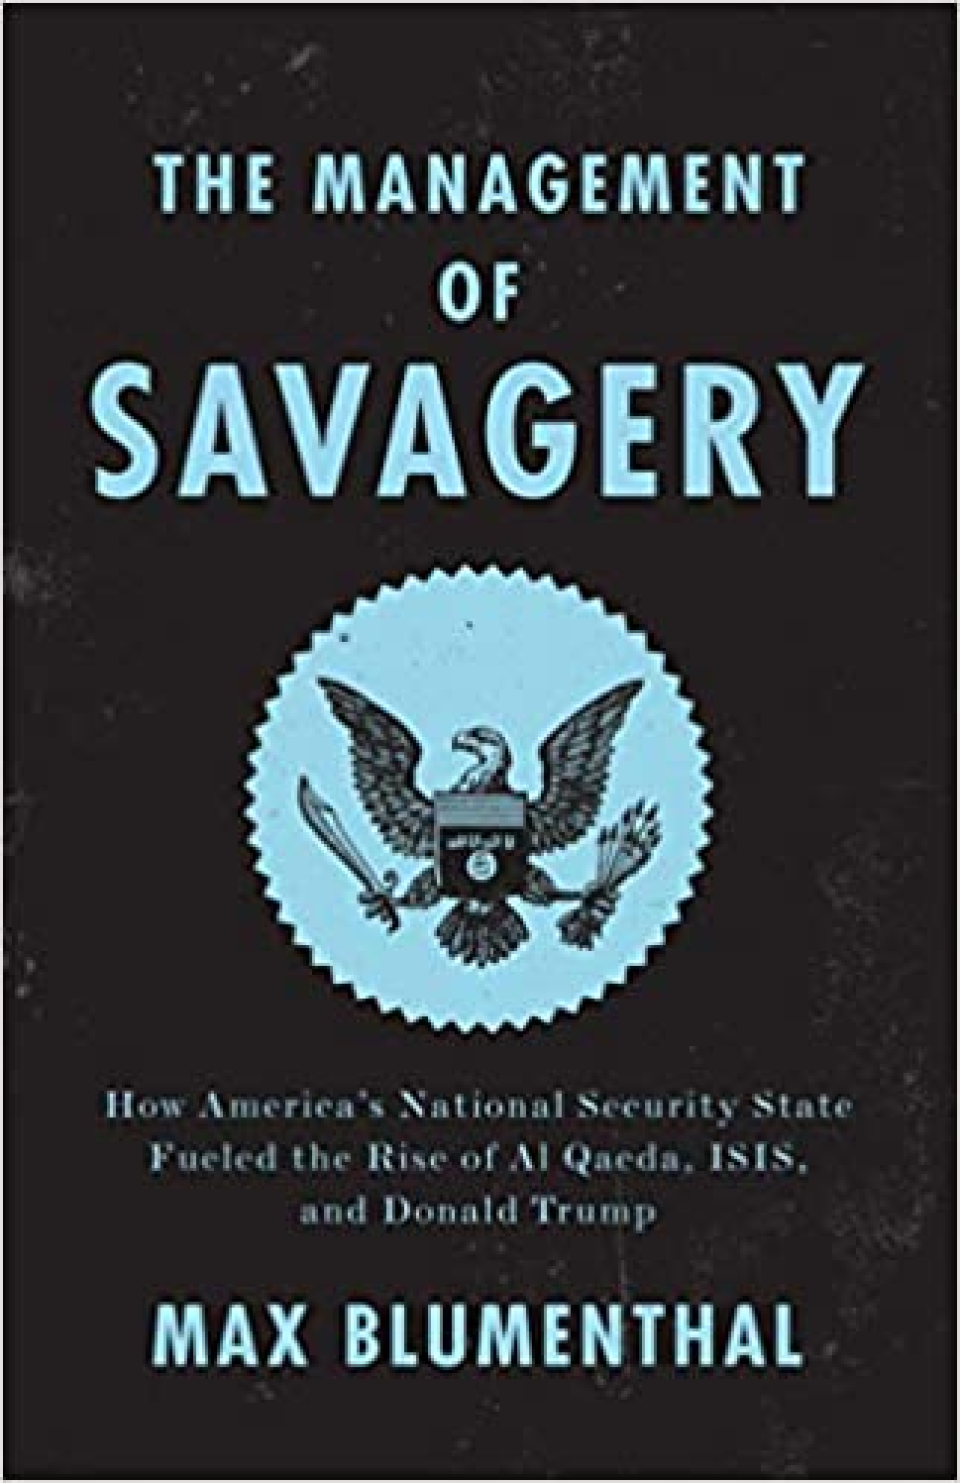 The Management of Savagery: How America’s National Security State Fueled the Rise of Al Qaeda, ISIS, and Donald Trump